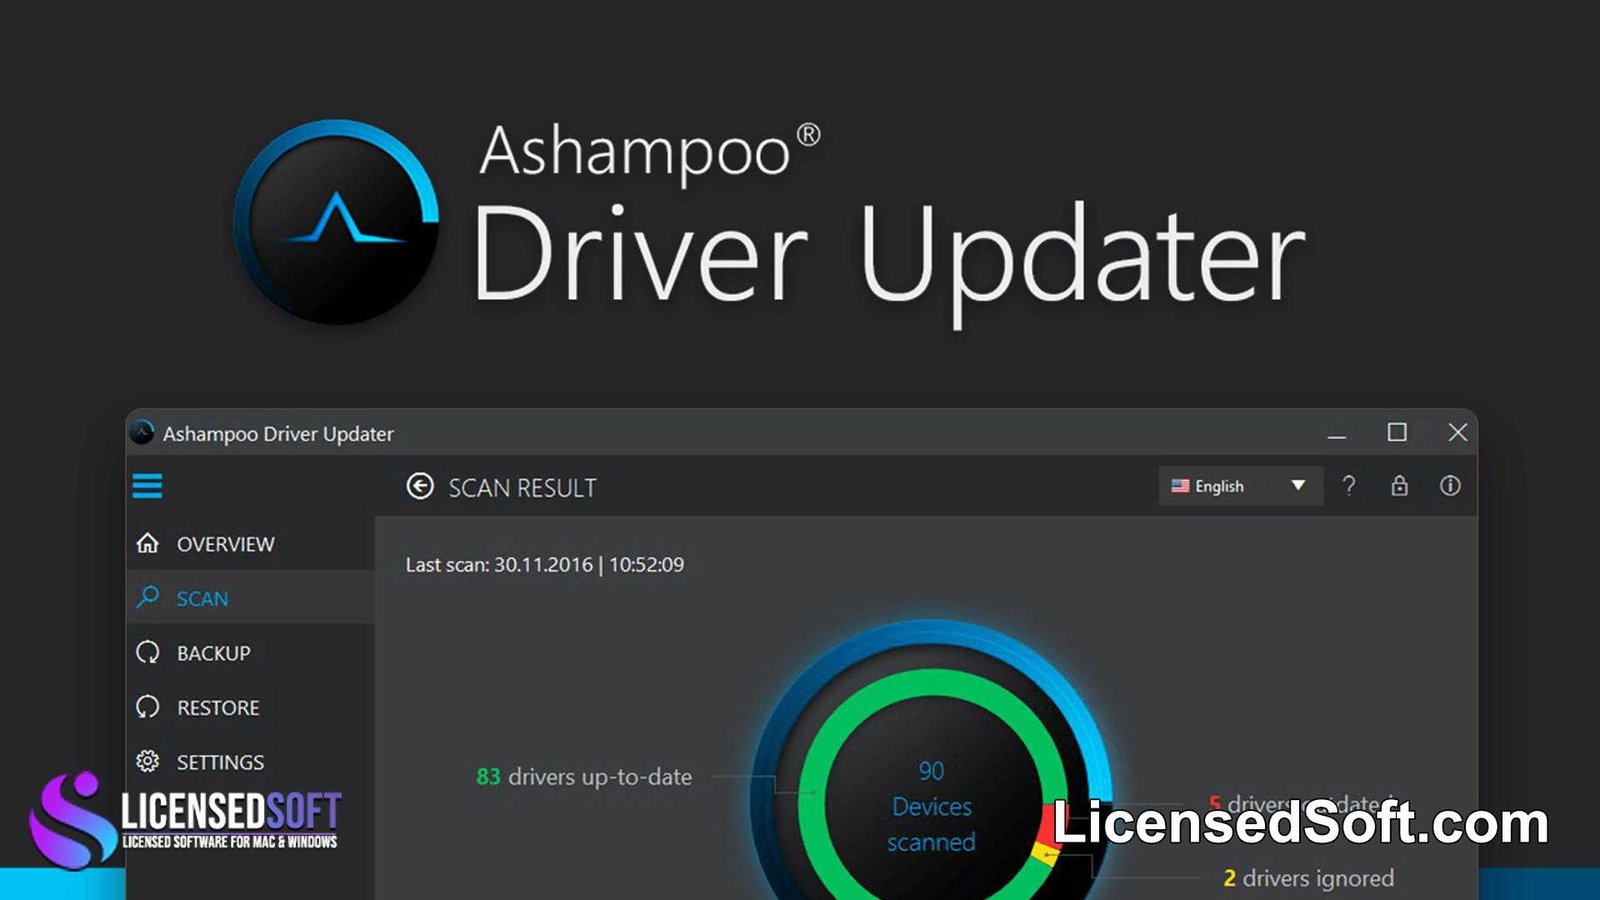 Ashampoo Driver Updater 1.6.1 Perpetual License By LicensedSoft